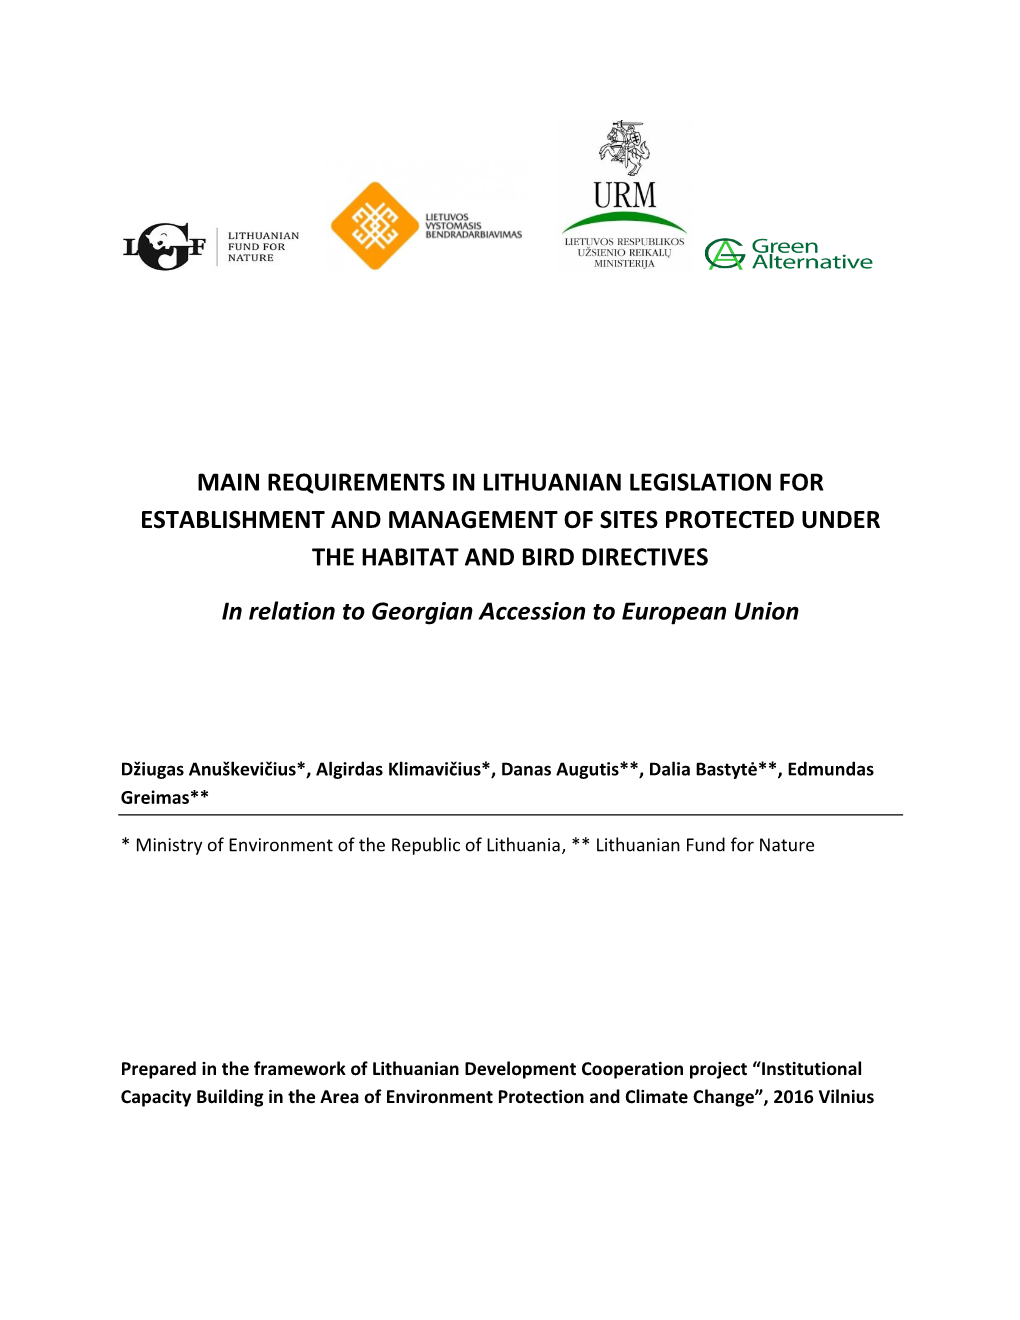 Main Requirements in Lithuanian Legislation for Establishment and Management of Sites Protected Under the Habitat and Bird Directives